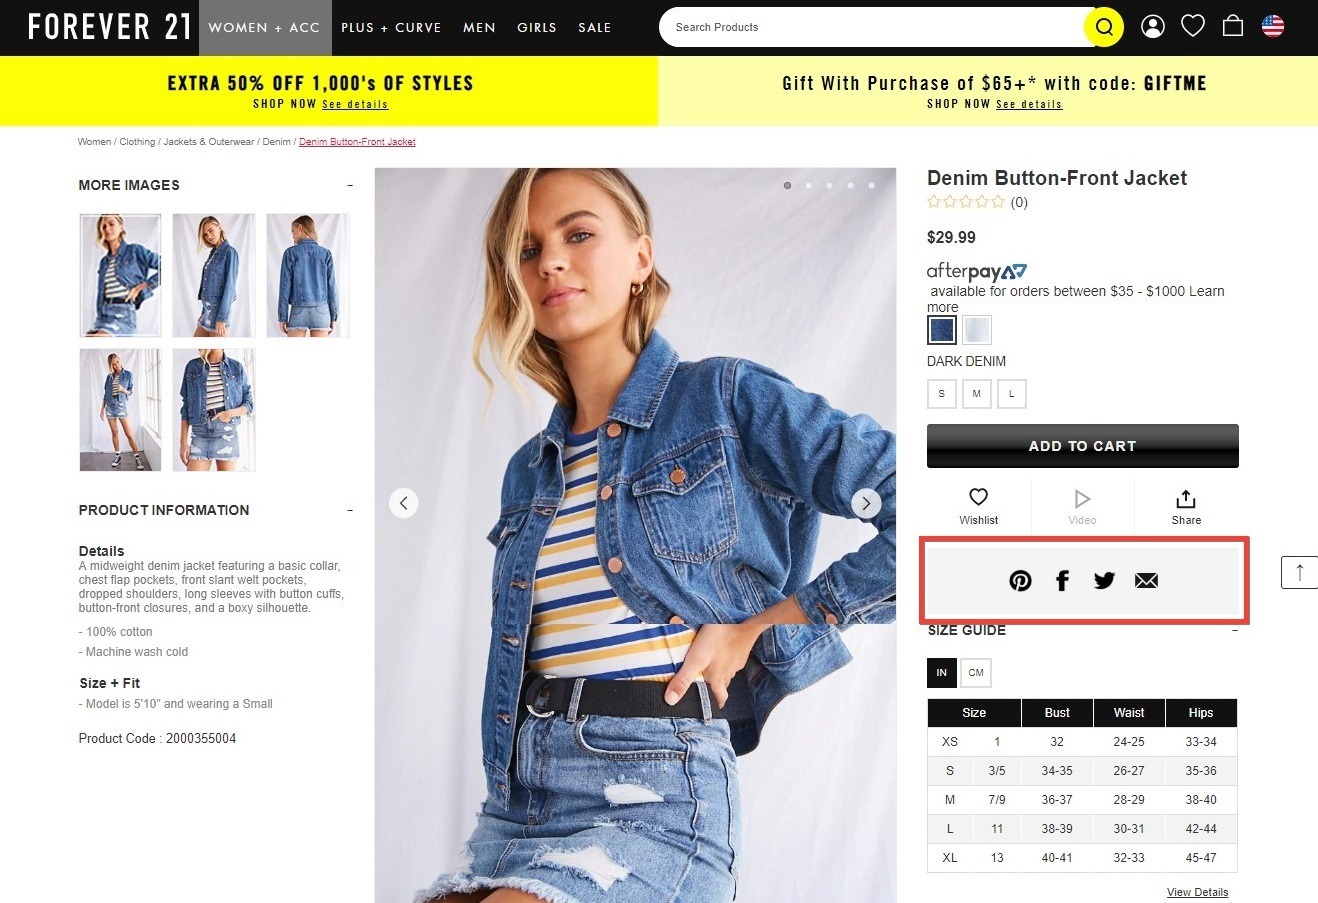 How to Create Awesome Product Pages That Convert